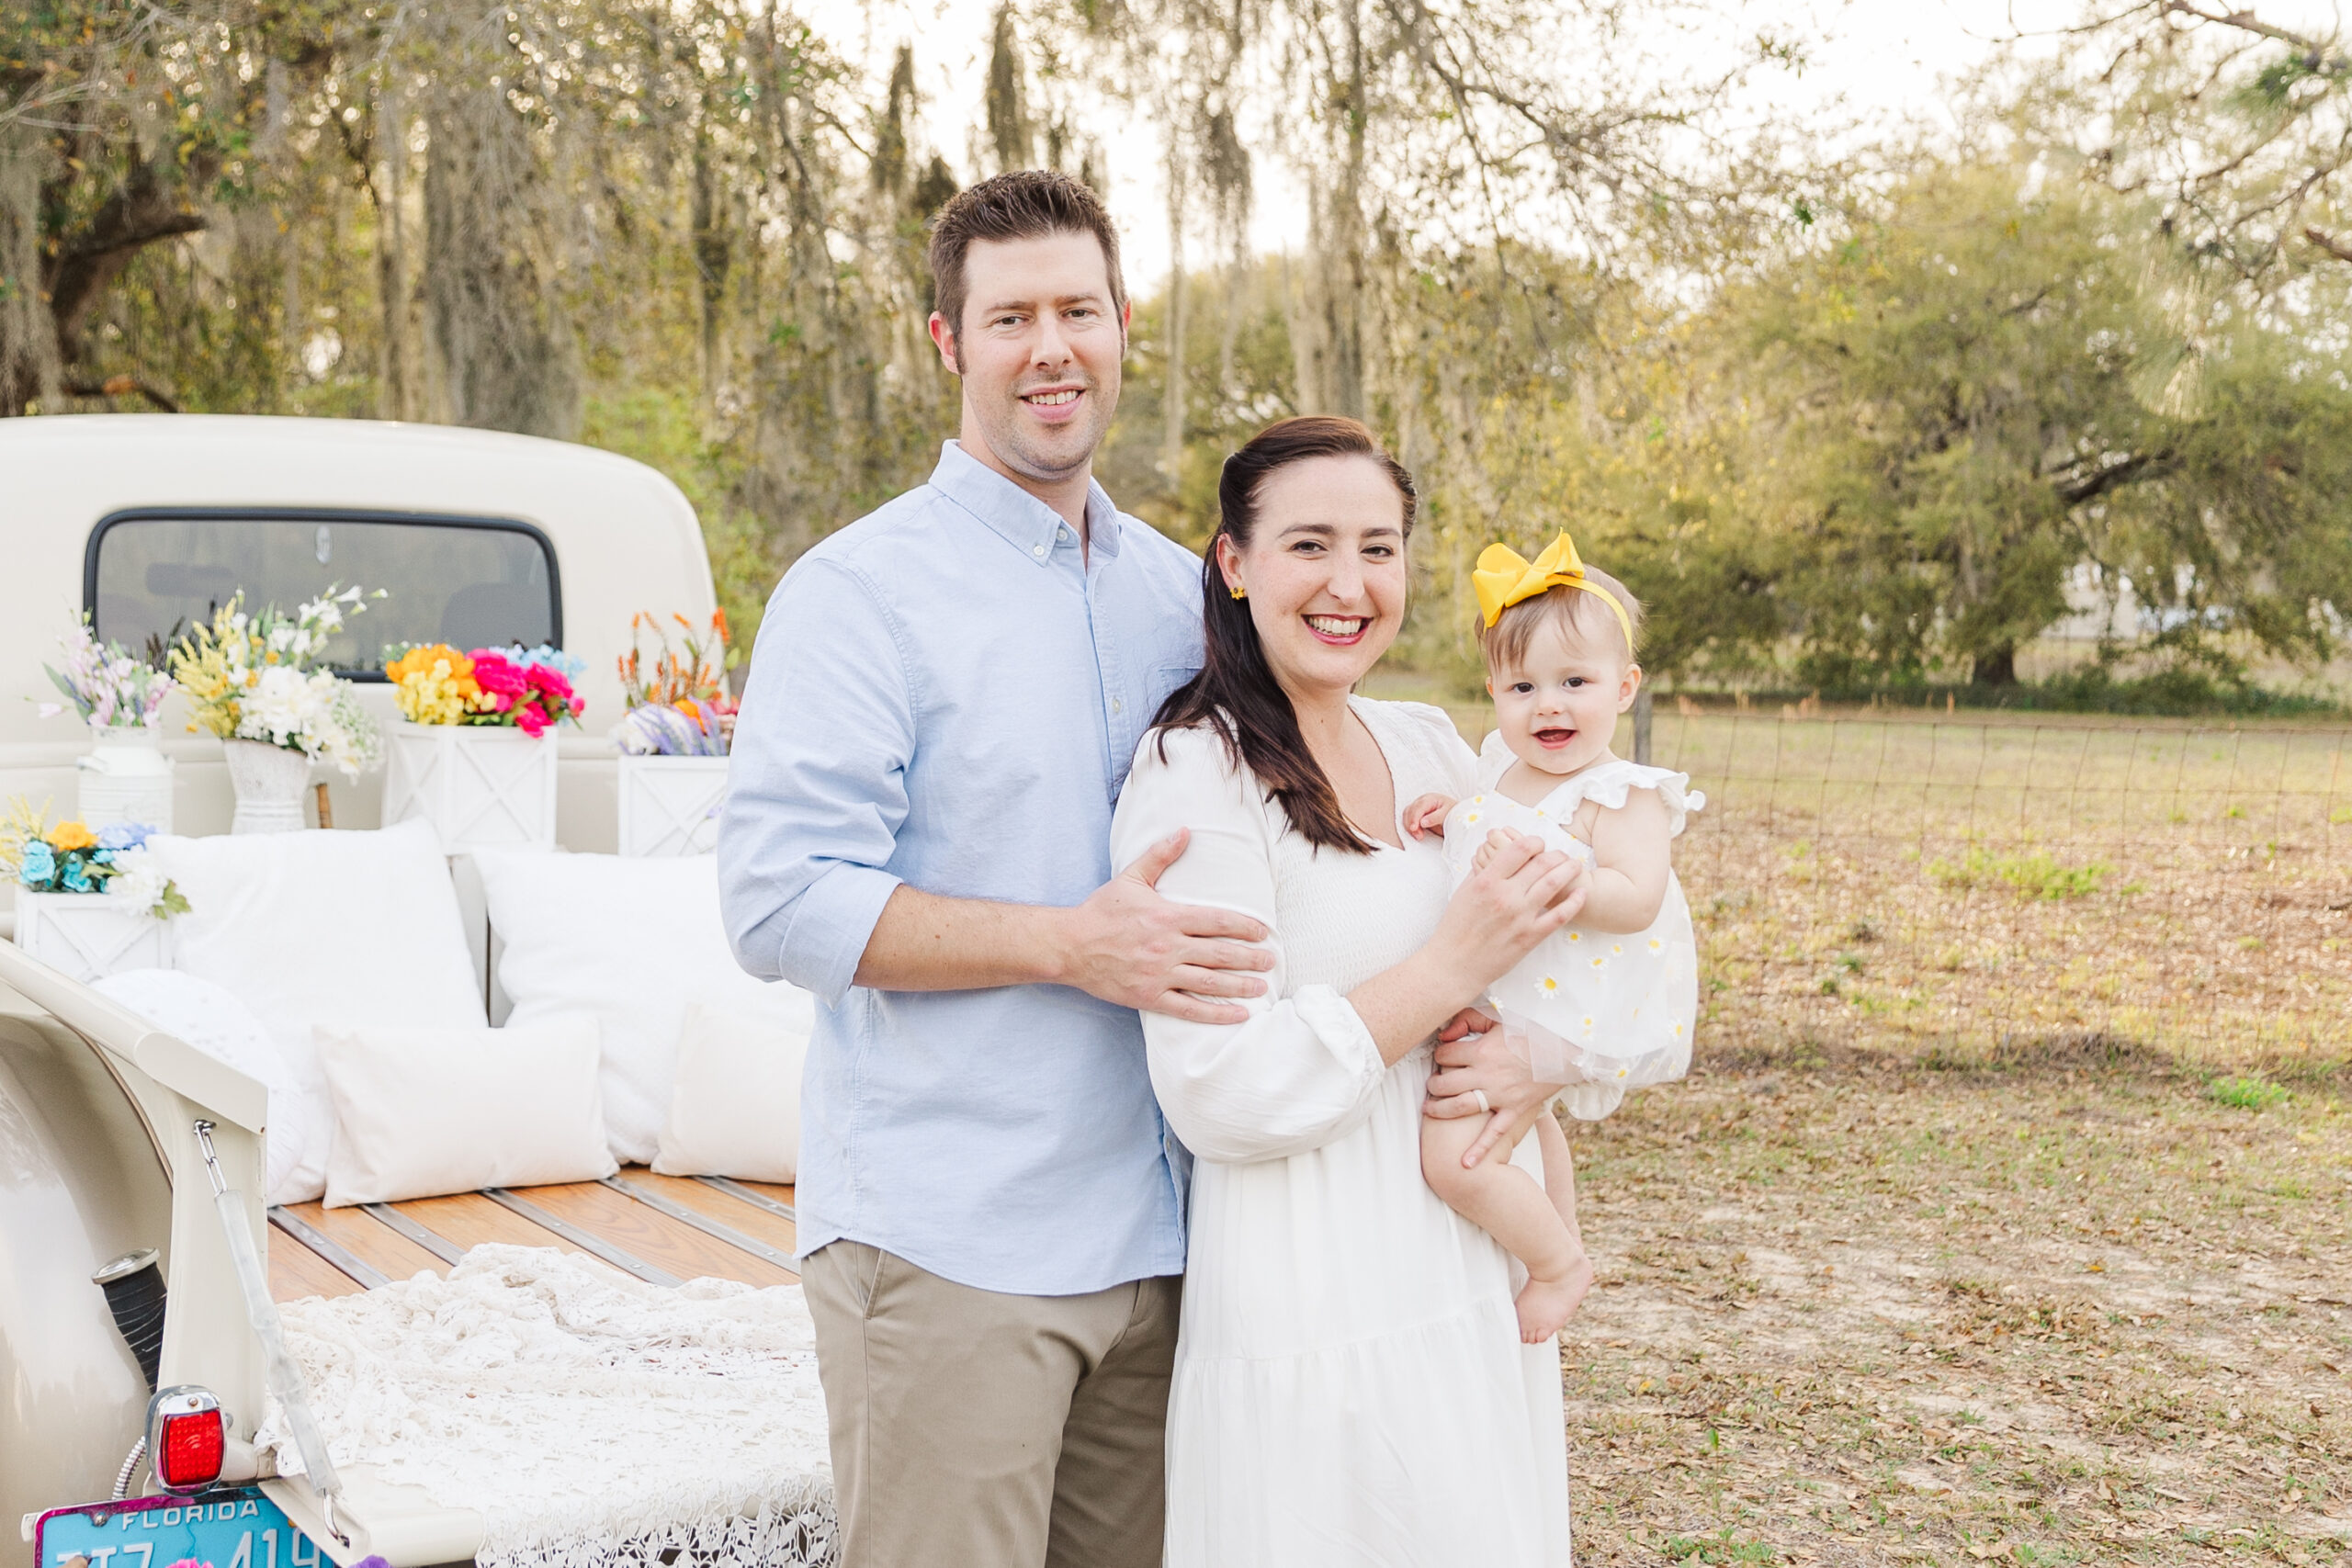 Mom, Dad and baby girl pose by vintage truck for Spring mini session